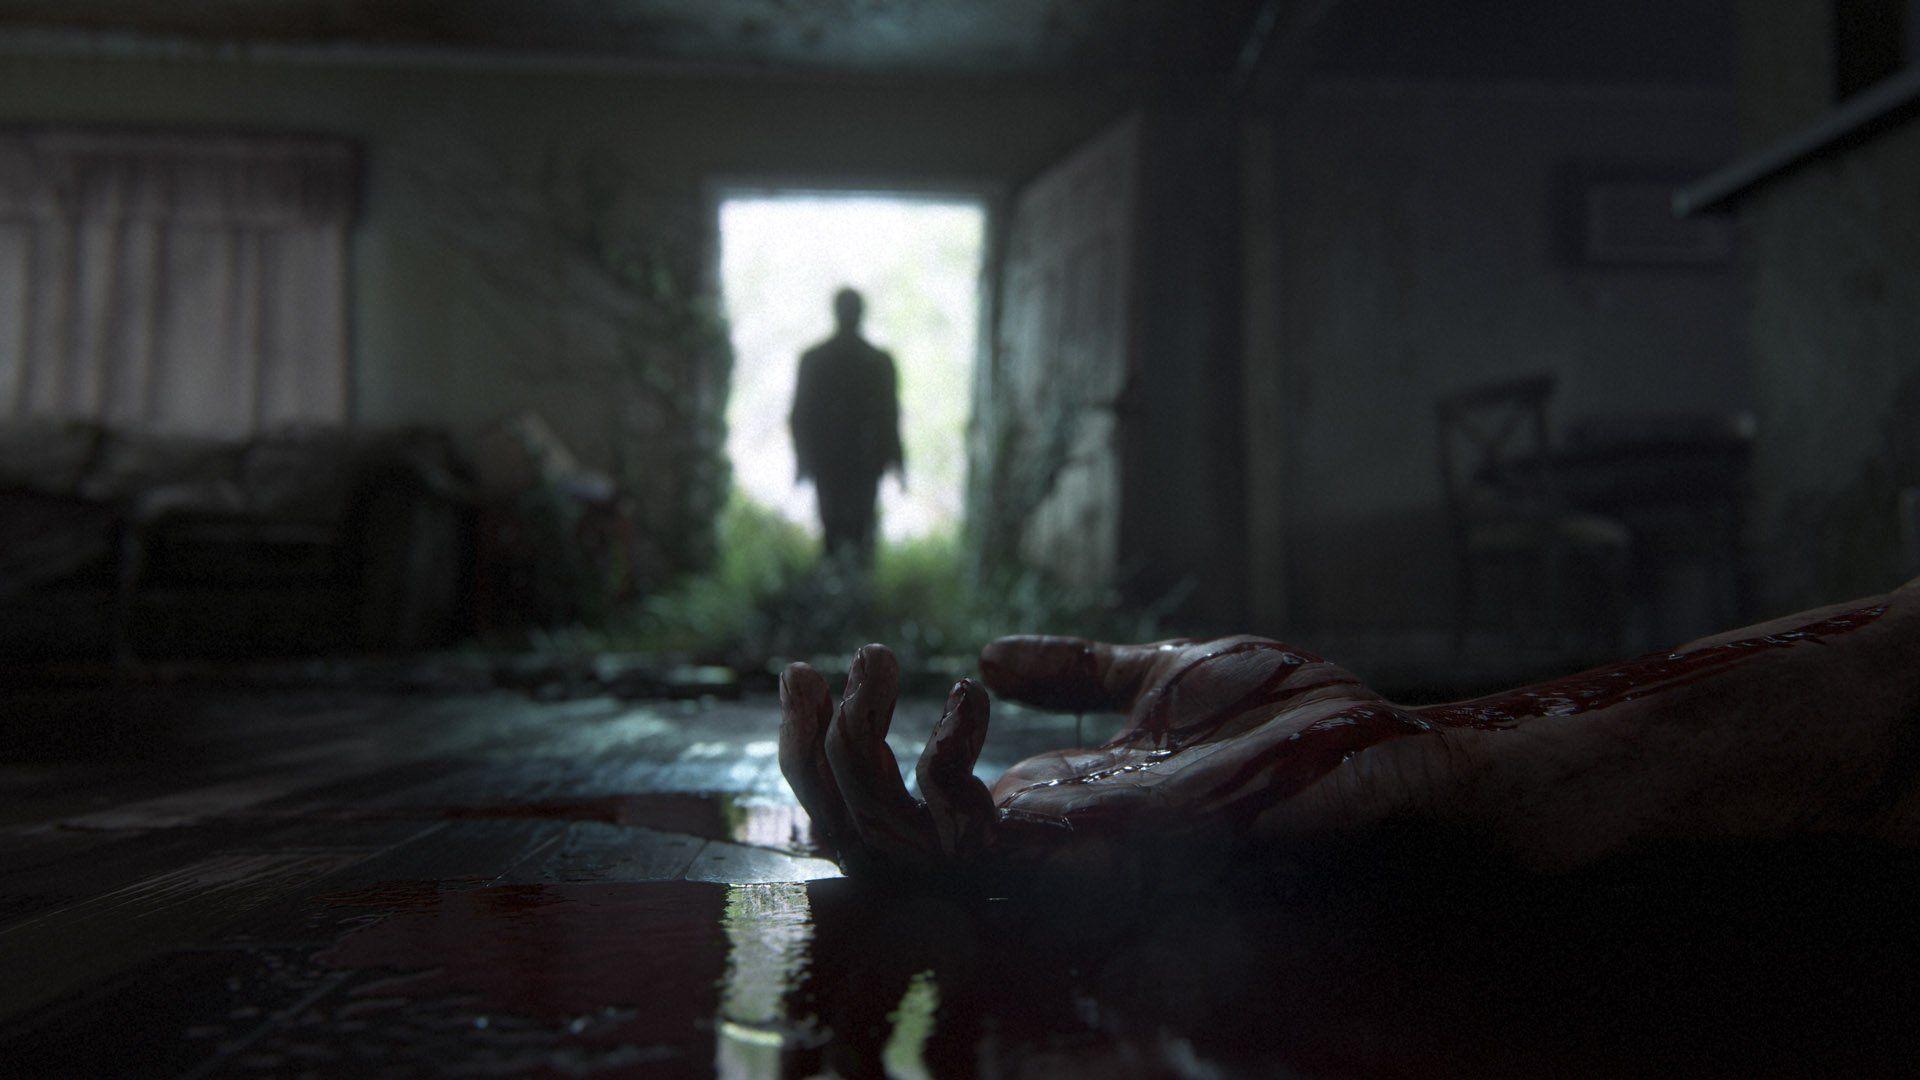 140+ The Last of Us Part II HD Wallpapers and Backgrounds